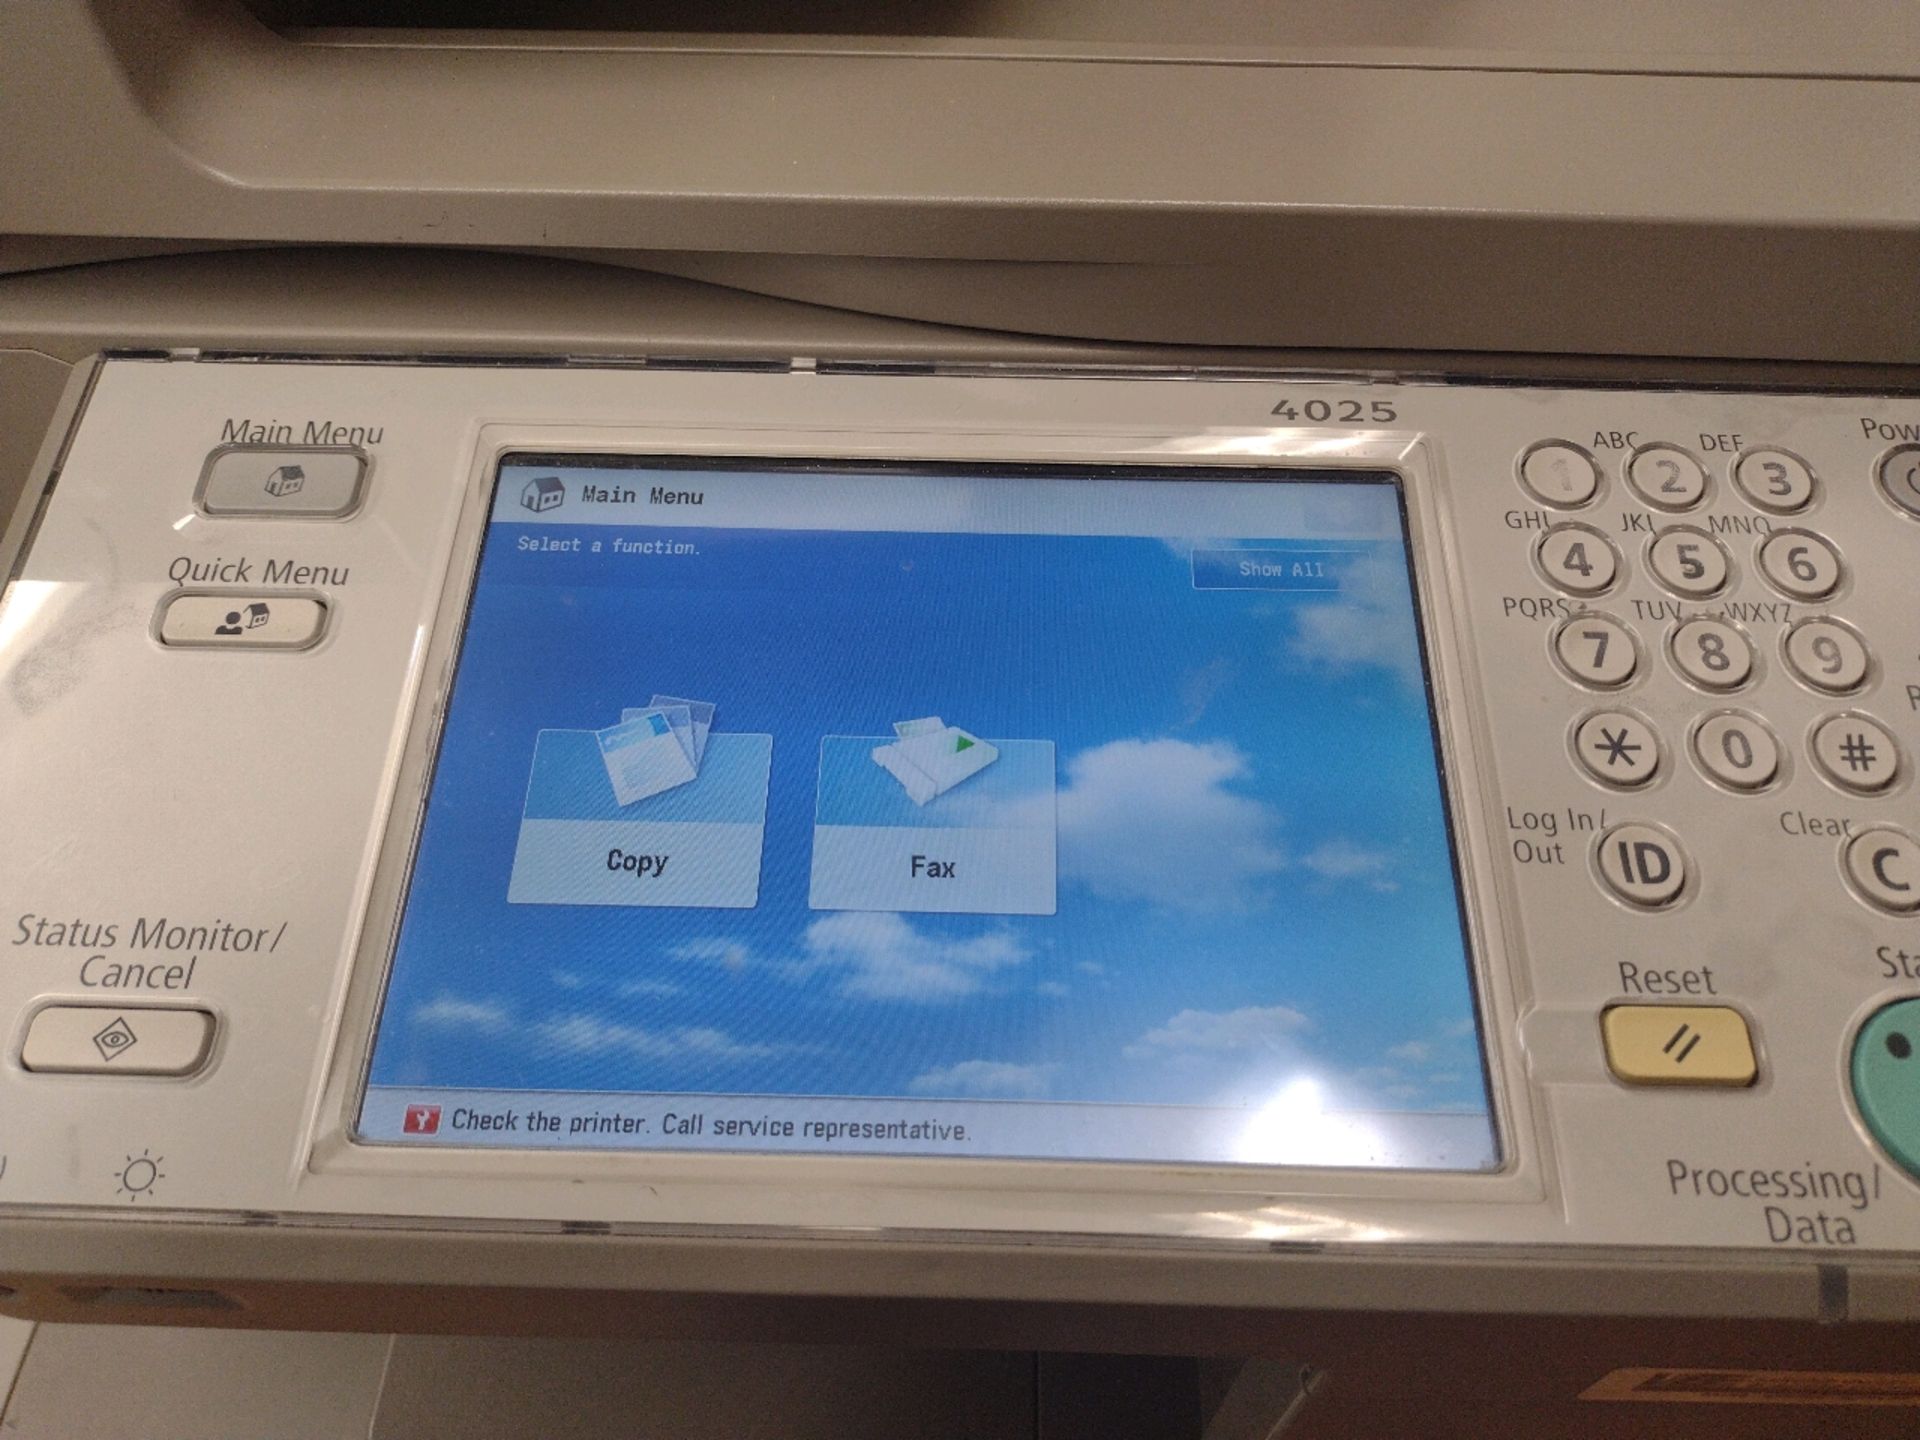 CANON IMAGERUNNER ADVANCE 4025 MULTIFUNCTION COPIER - Image 3 of 6